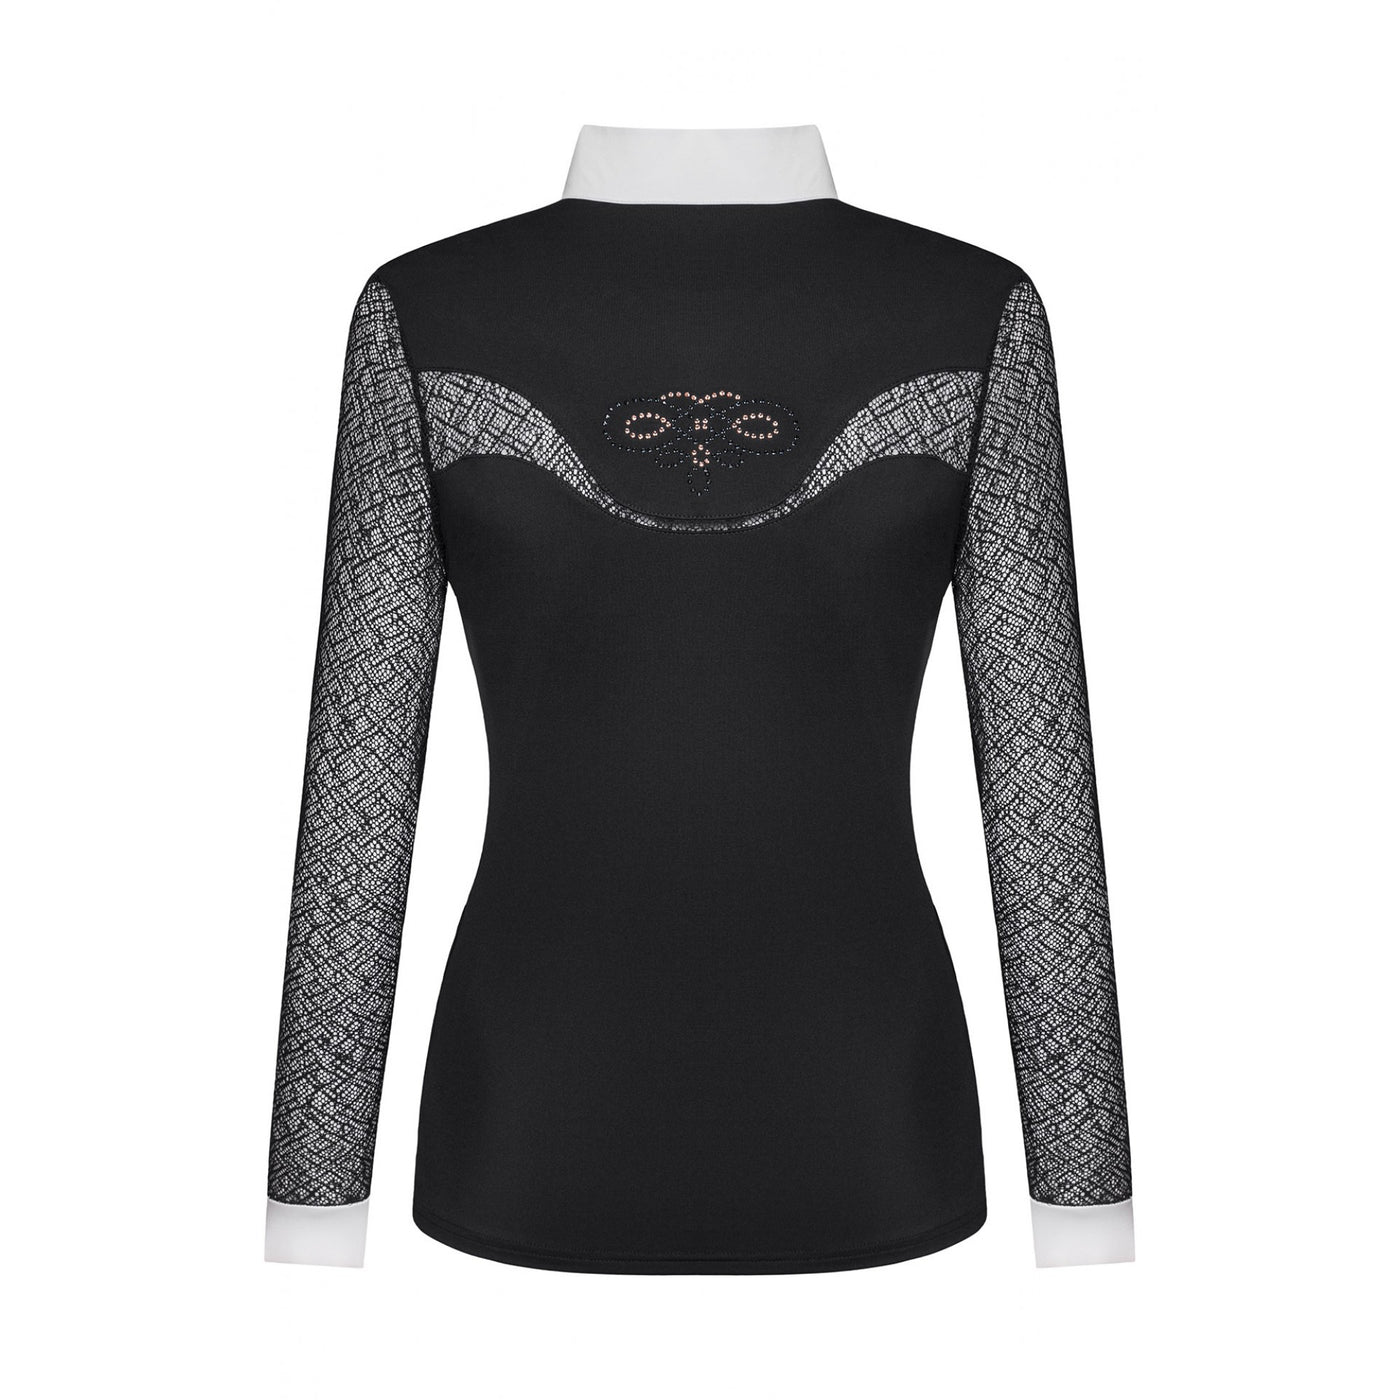 FAIR PLAY CECILE ROSEGOLD LONG SLEEVE COMPETITION SHOW SHIRT - BLACK